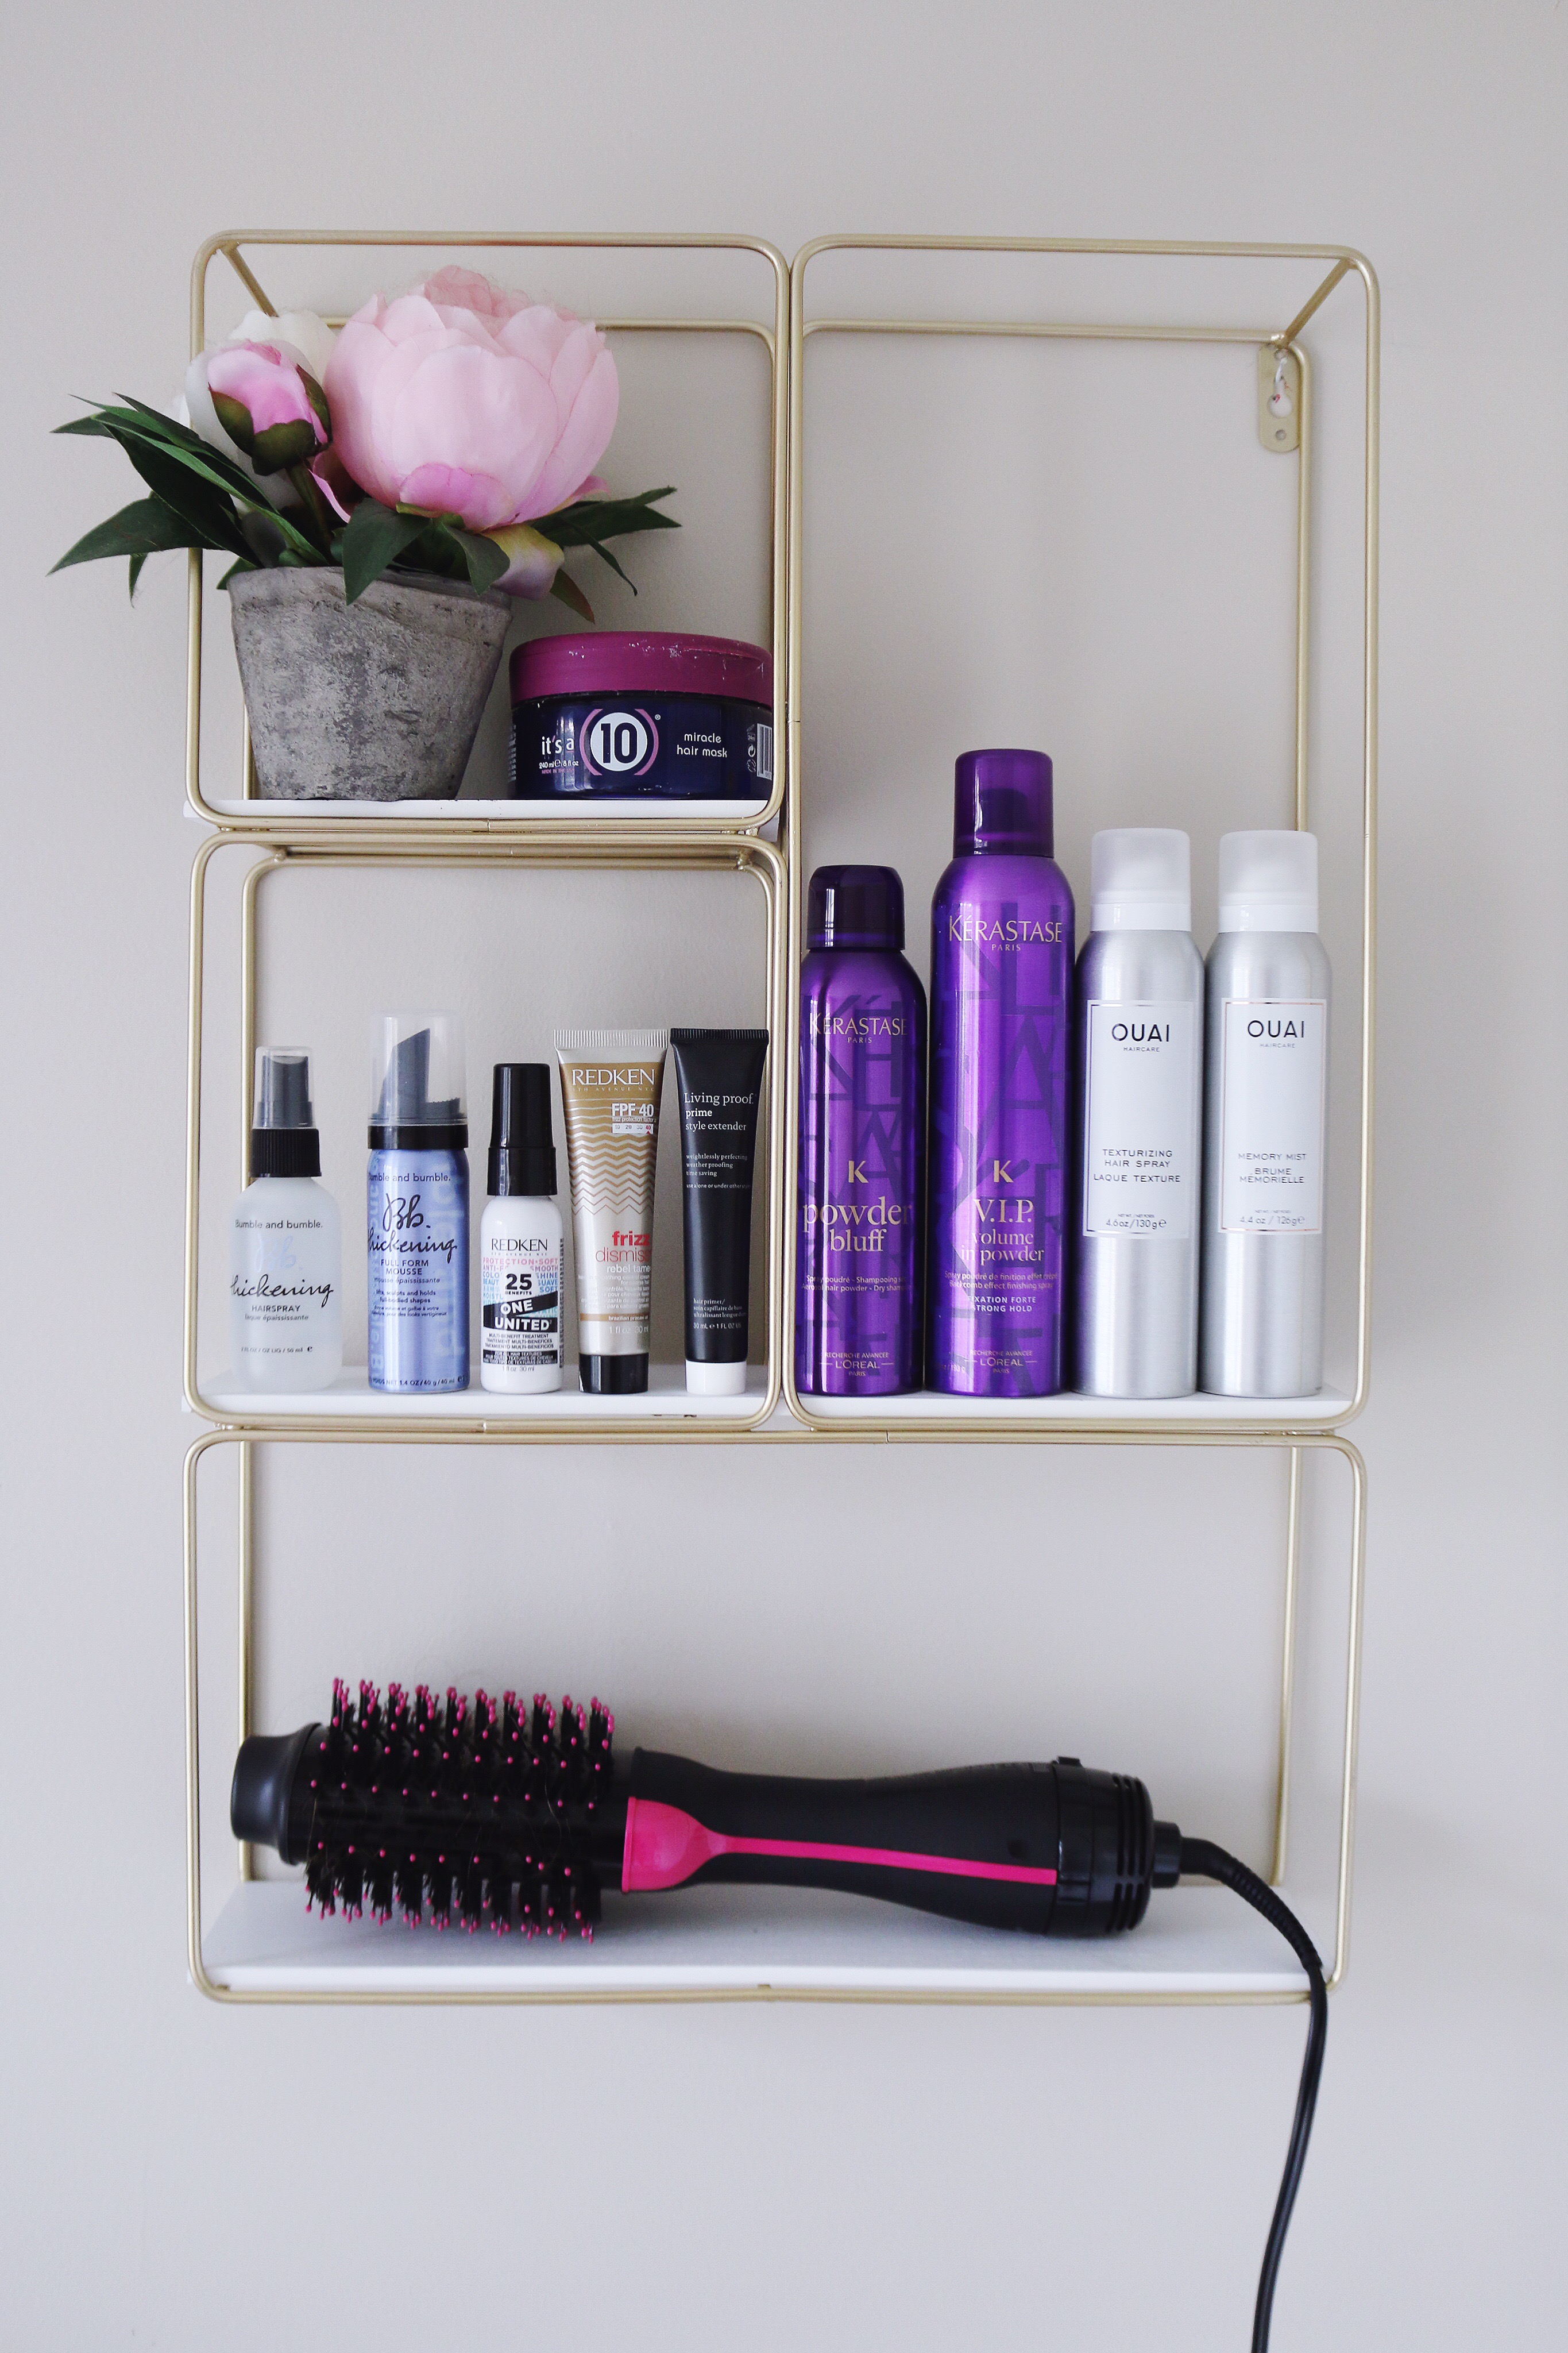 My complete haircare routine and favorite products